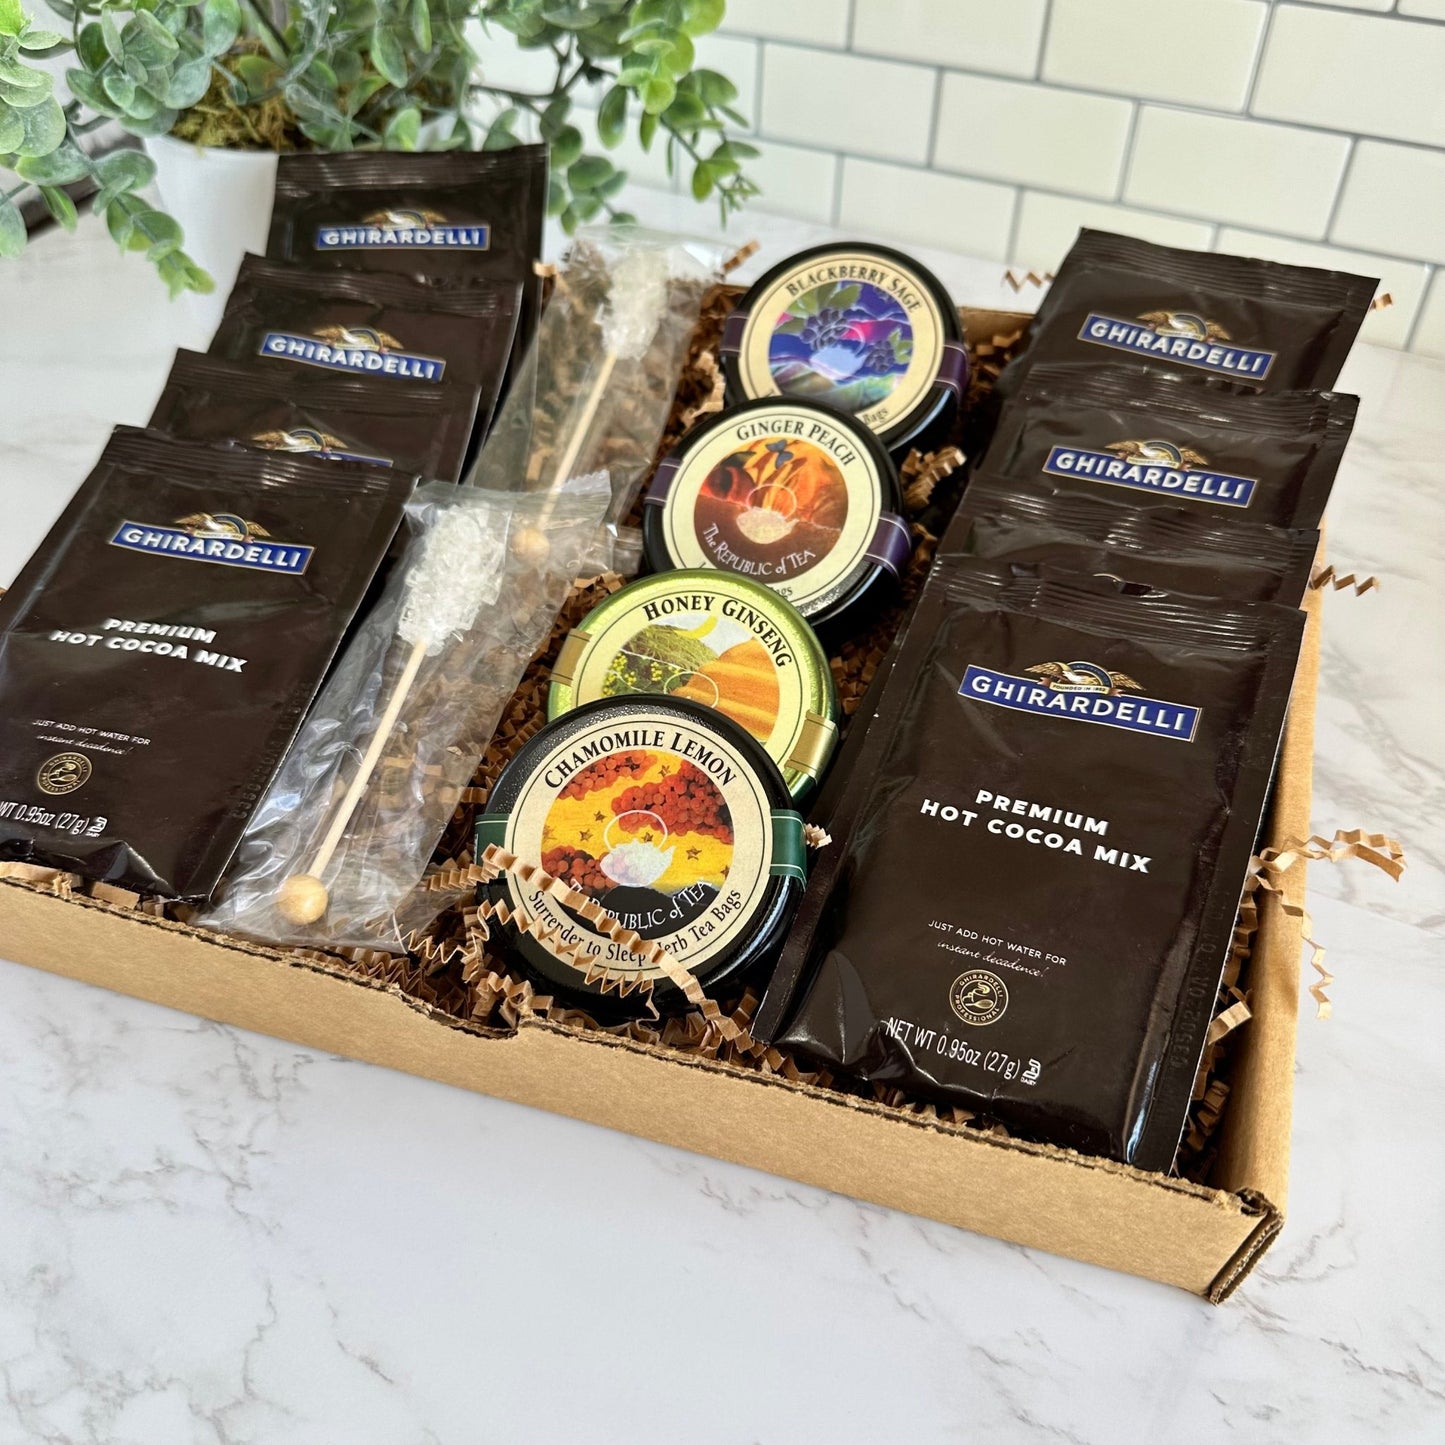 Deluxe Tea and Cocoa Gift Basket | Republic of Tea and Ghirardelli Cocoa Corporate Gift Baskets - The Meeting Place on Market